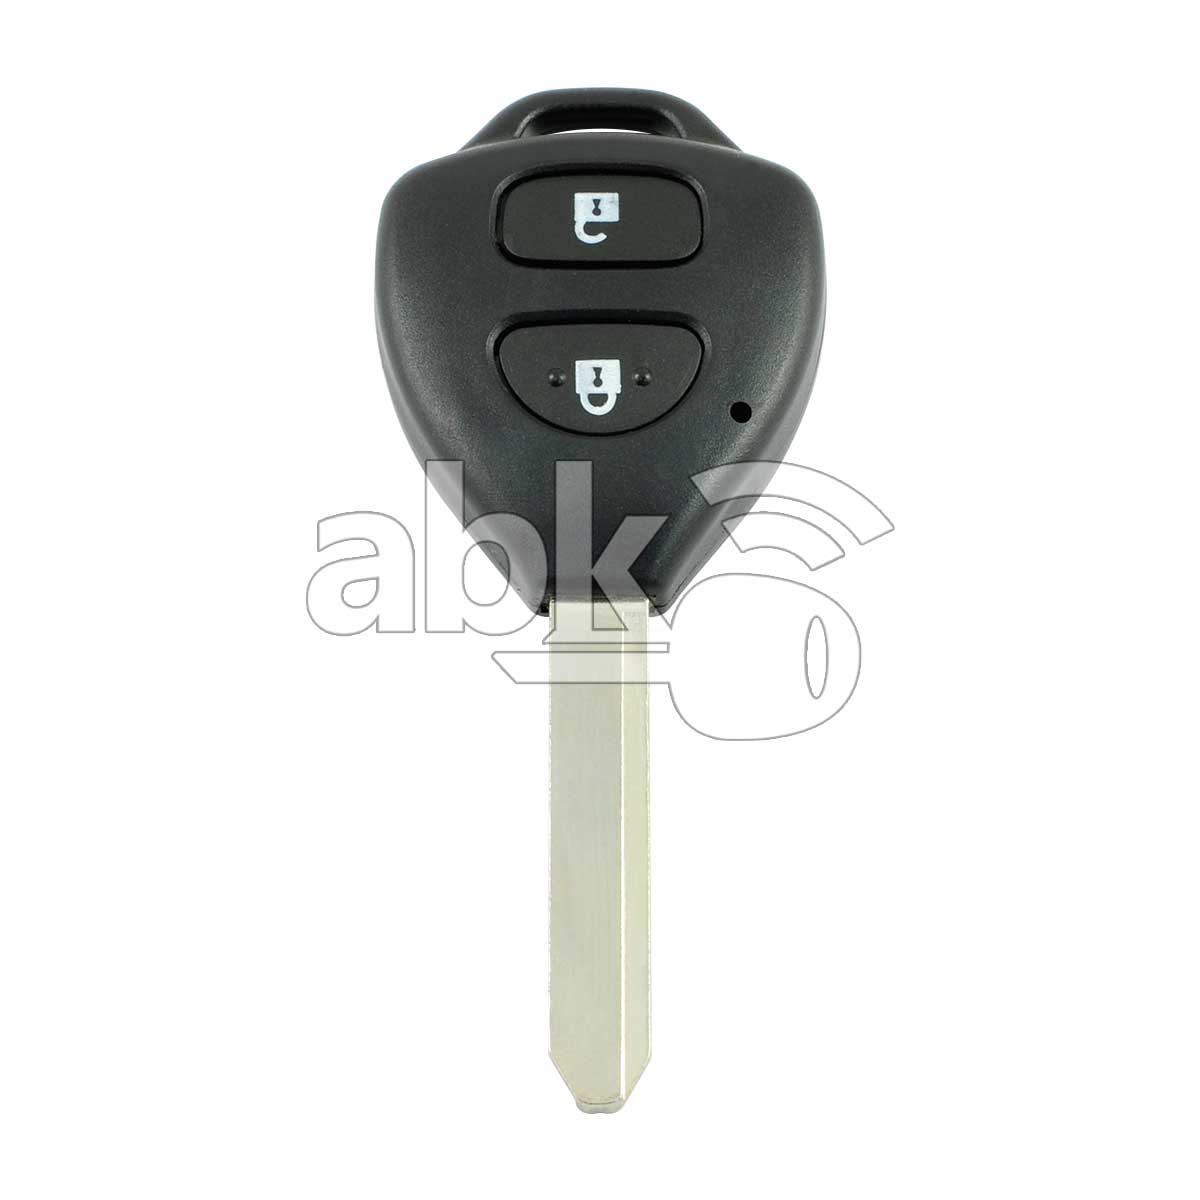 Toyota 2006+ Key Head Remote Cover 2Buttons TOY47 - ABK-2419 - ABKEYS.COM